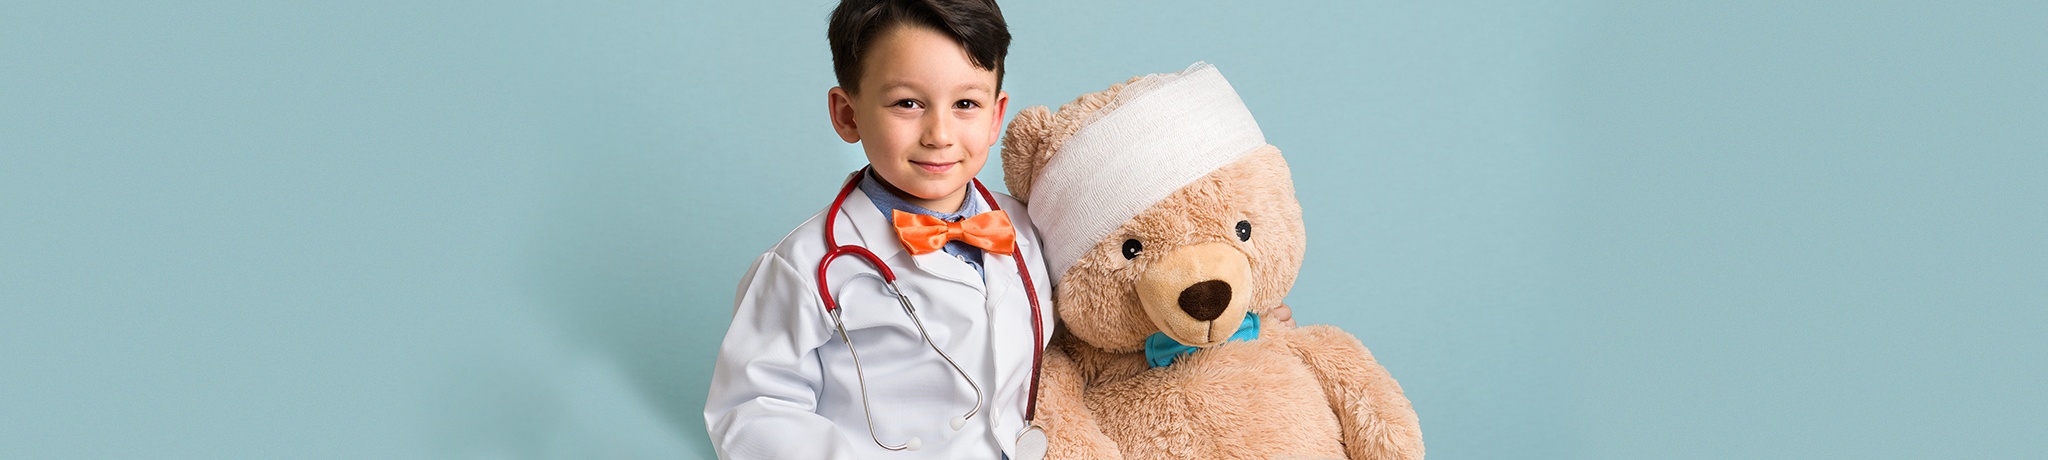 Boy dressed as doctor with teddy bear with wrap around head